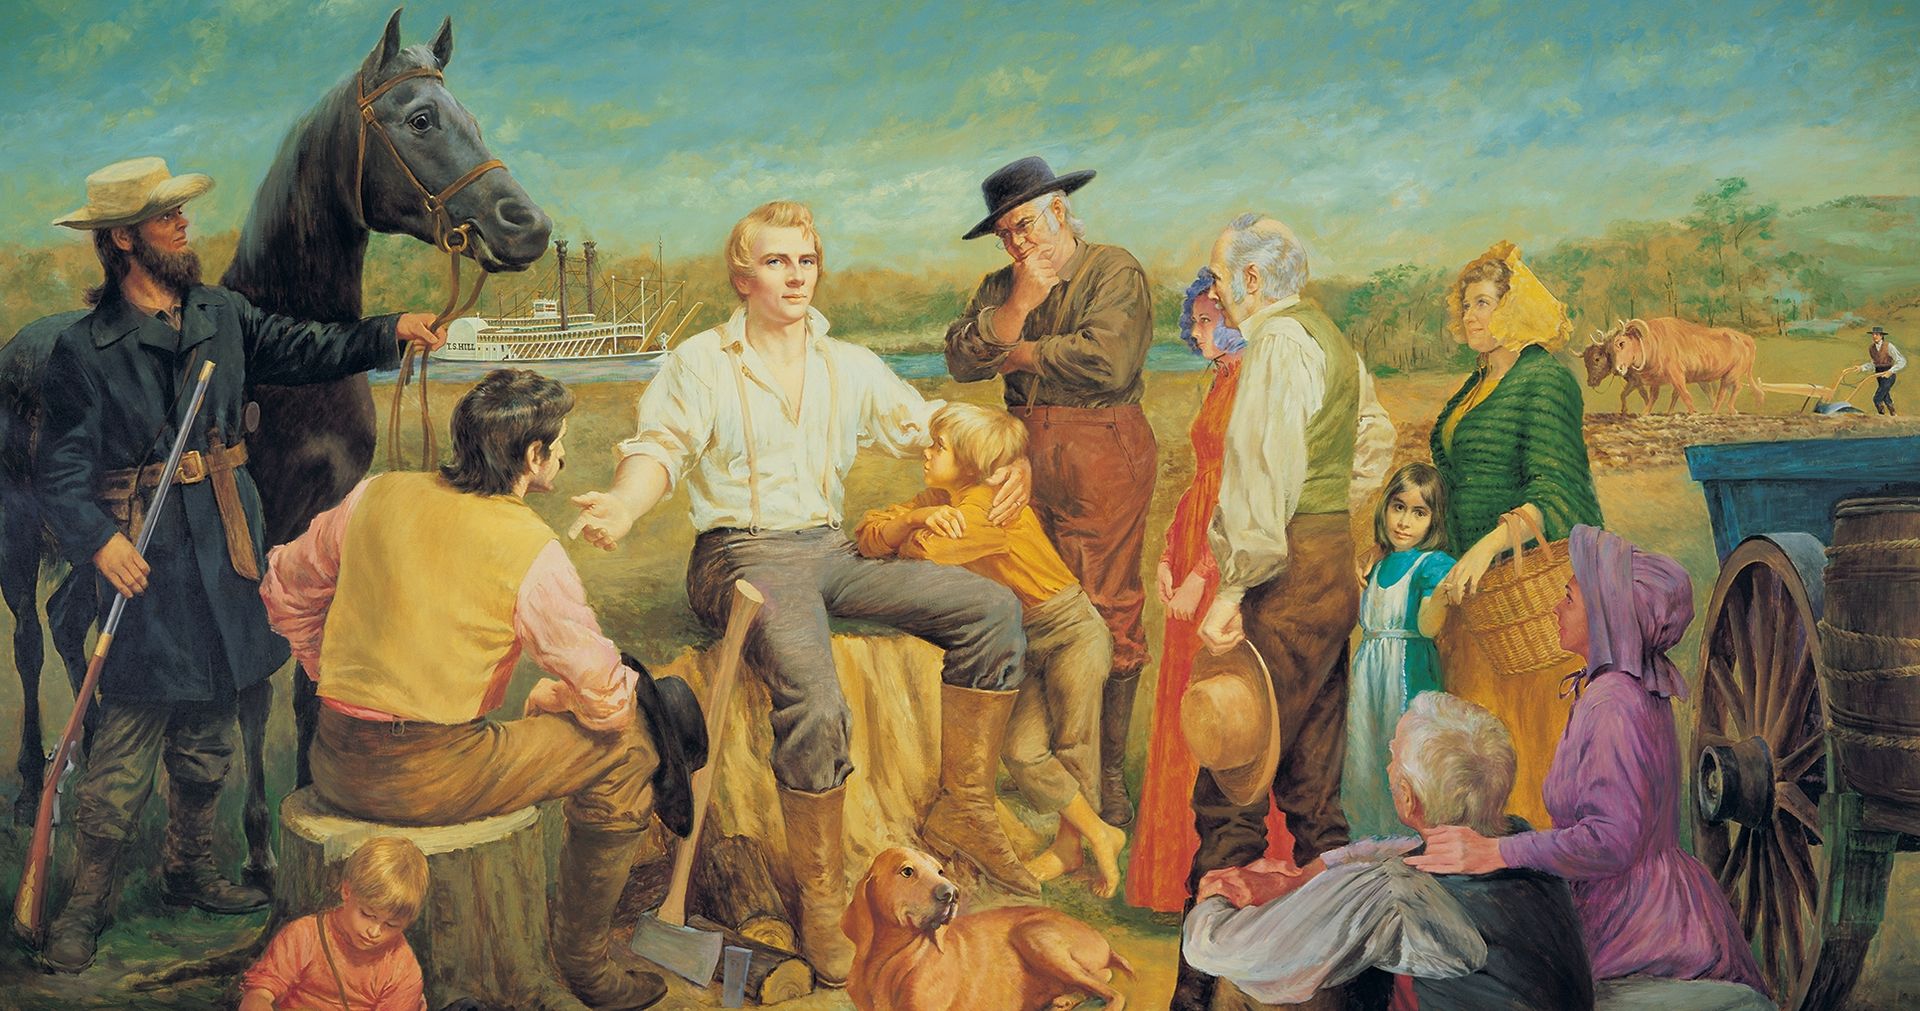 "Joseph in Nauvoo, 1840," by Ted Gorka.